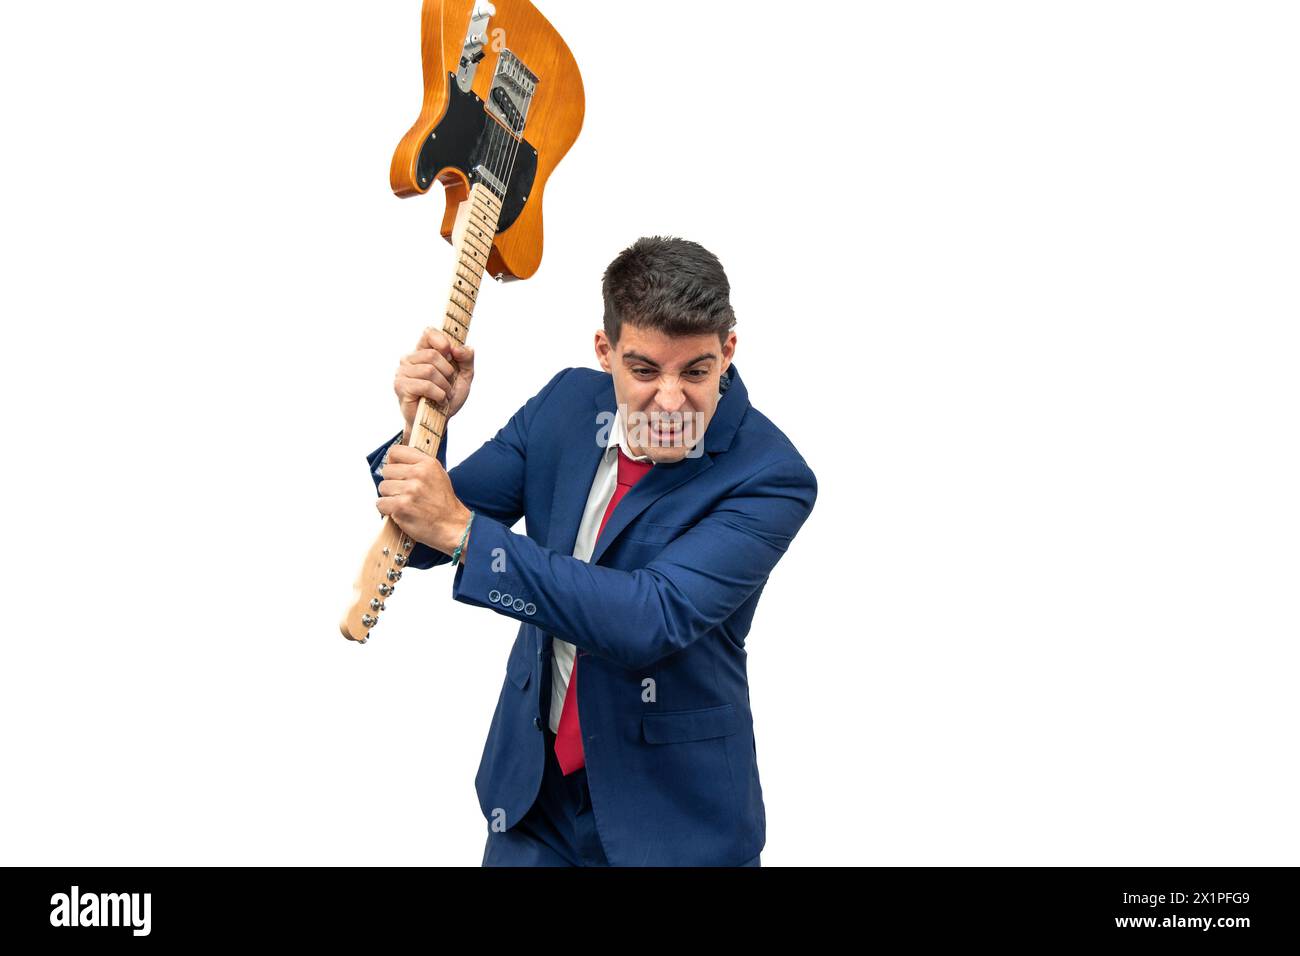 furious expression of a businessman as he smashes an electric guitar against the ground in a fit of rage. embodies corporate aggression and violence w Stock Photo